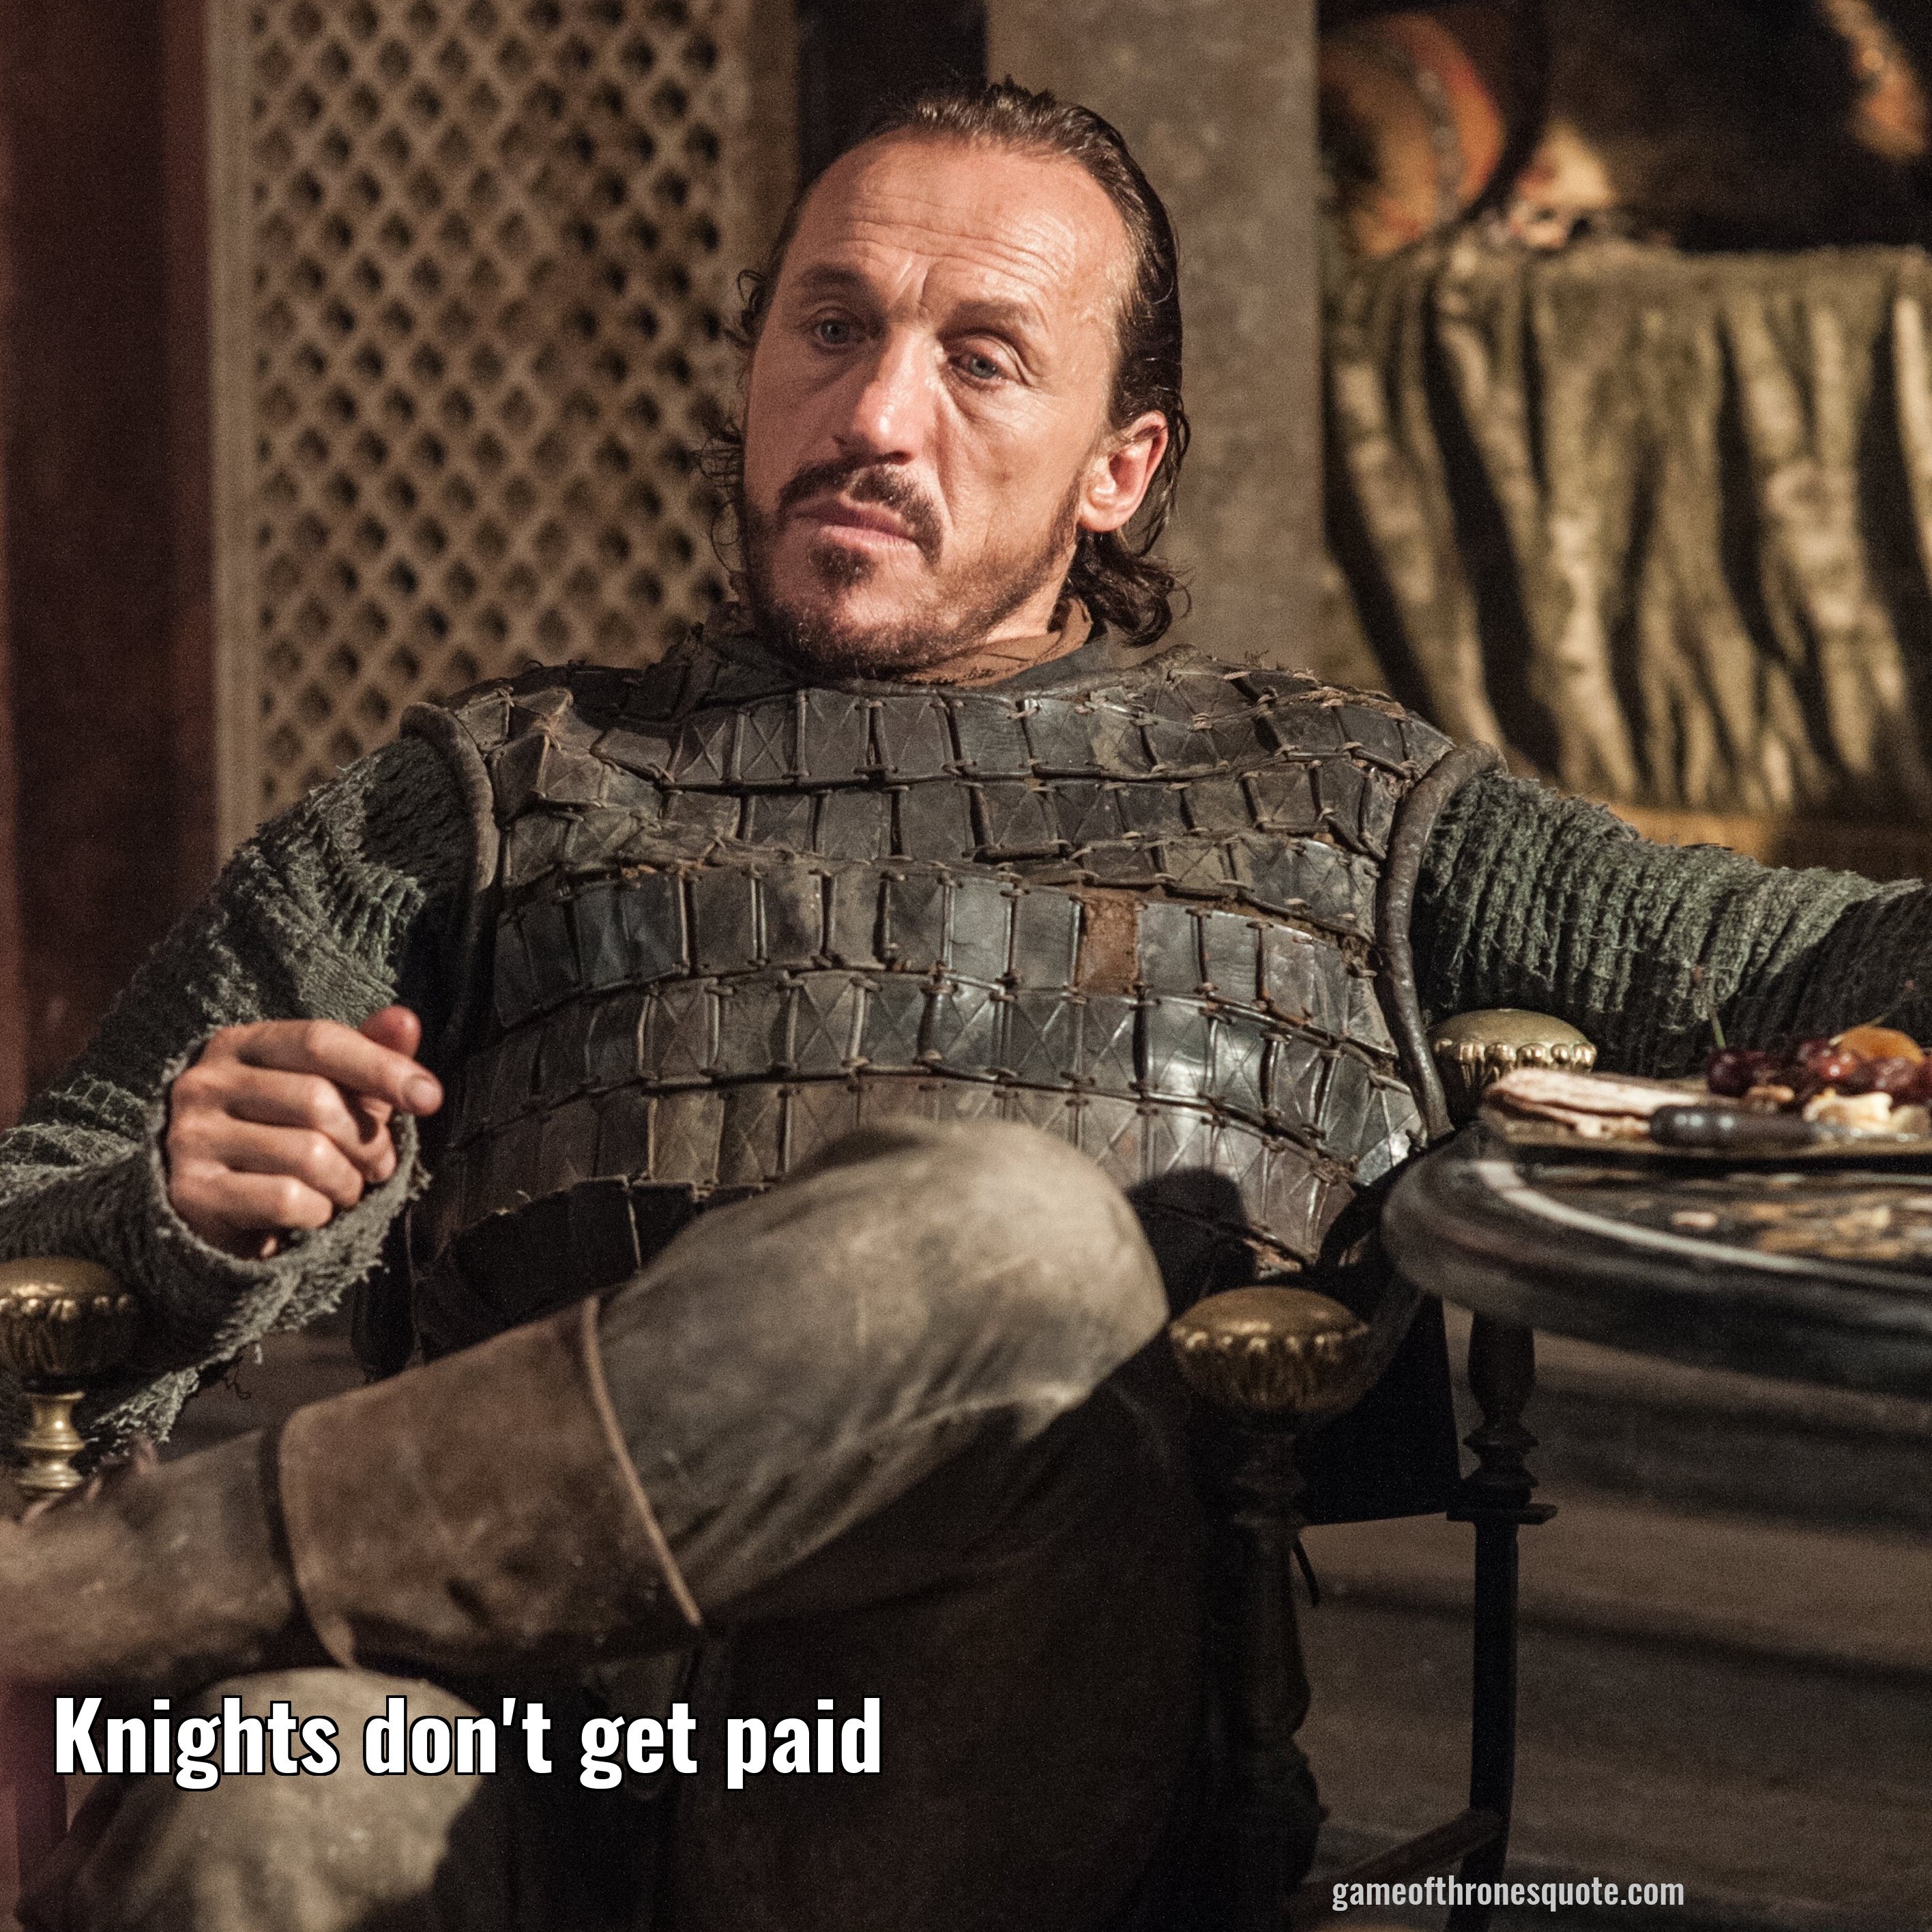 Knights don't get paid